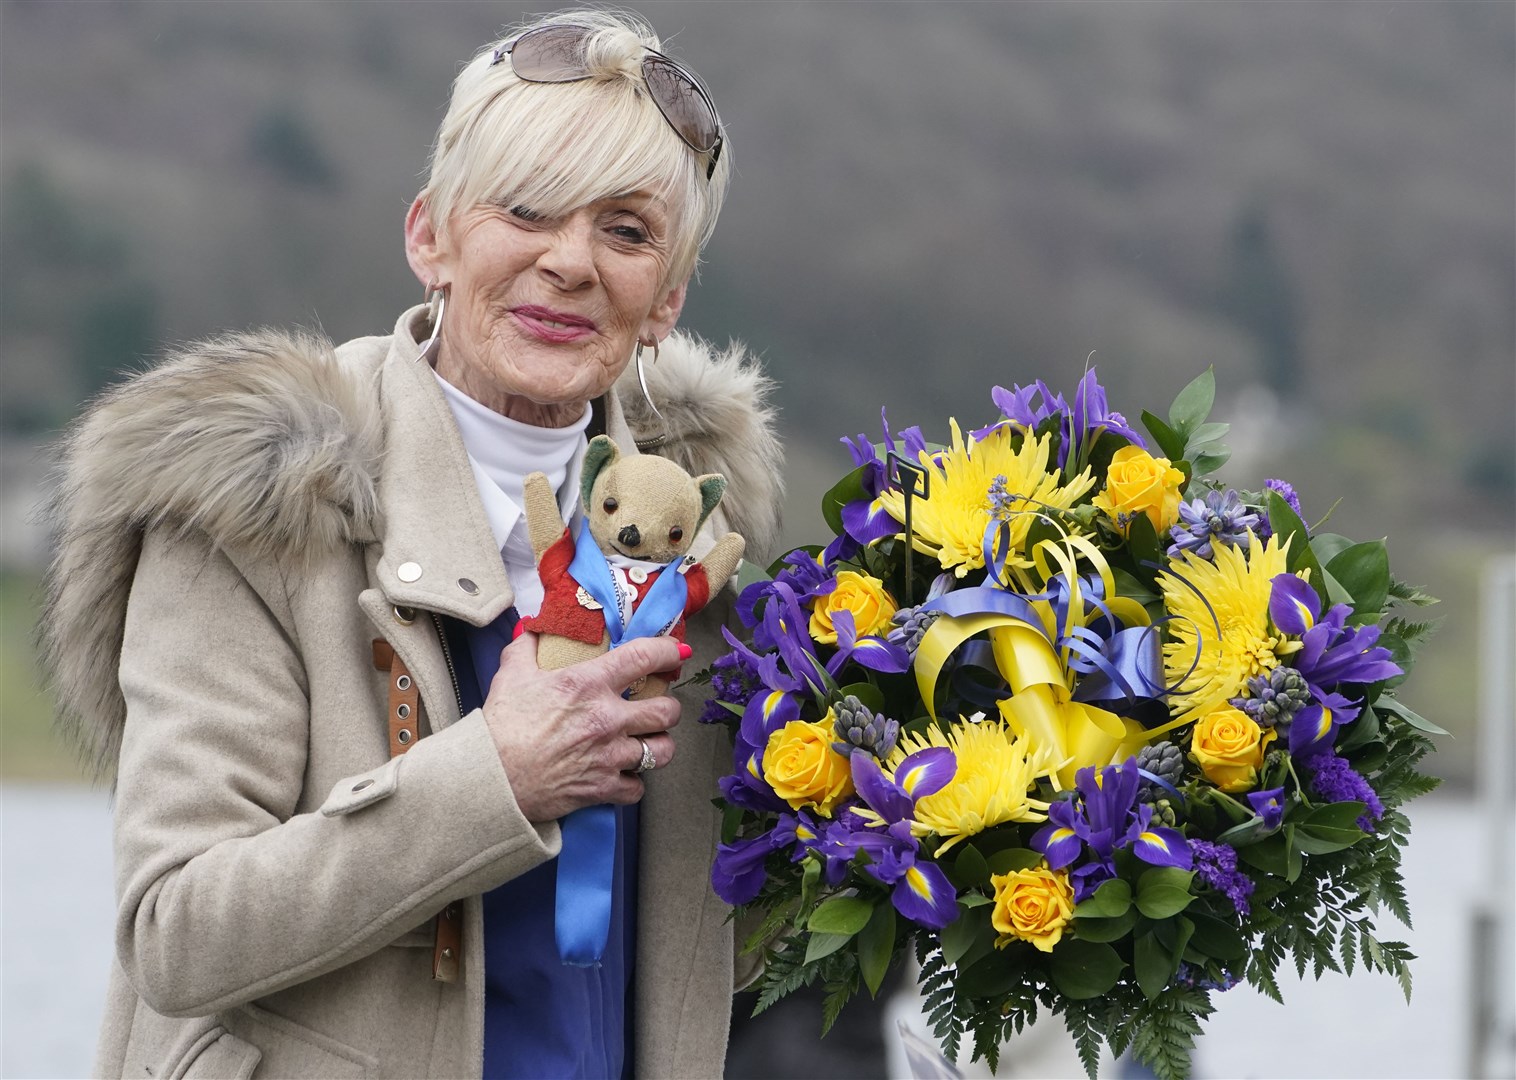 Gina Campbell, the daughter of world water speed record holder Donald Campbell, holds a bunch of flowers at Coniston Water during an event to mark the 100th anniversary of his birth (Owen Humphrey/PA)